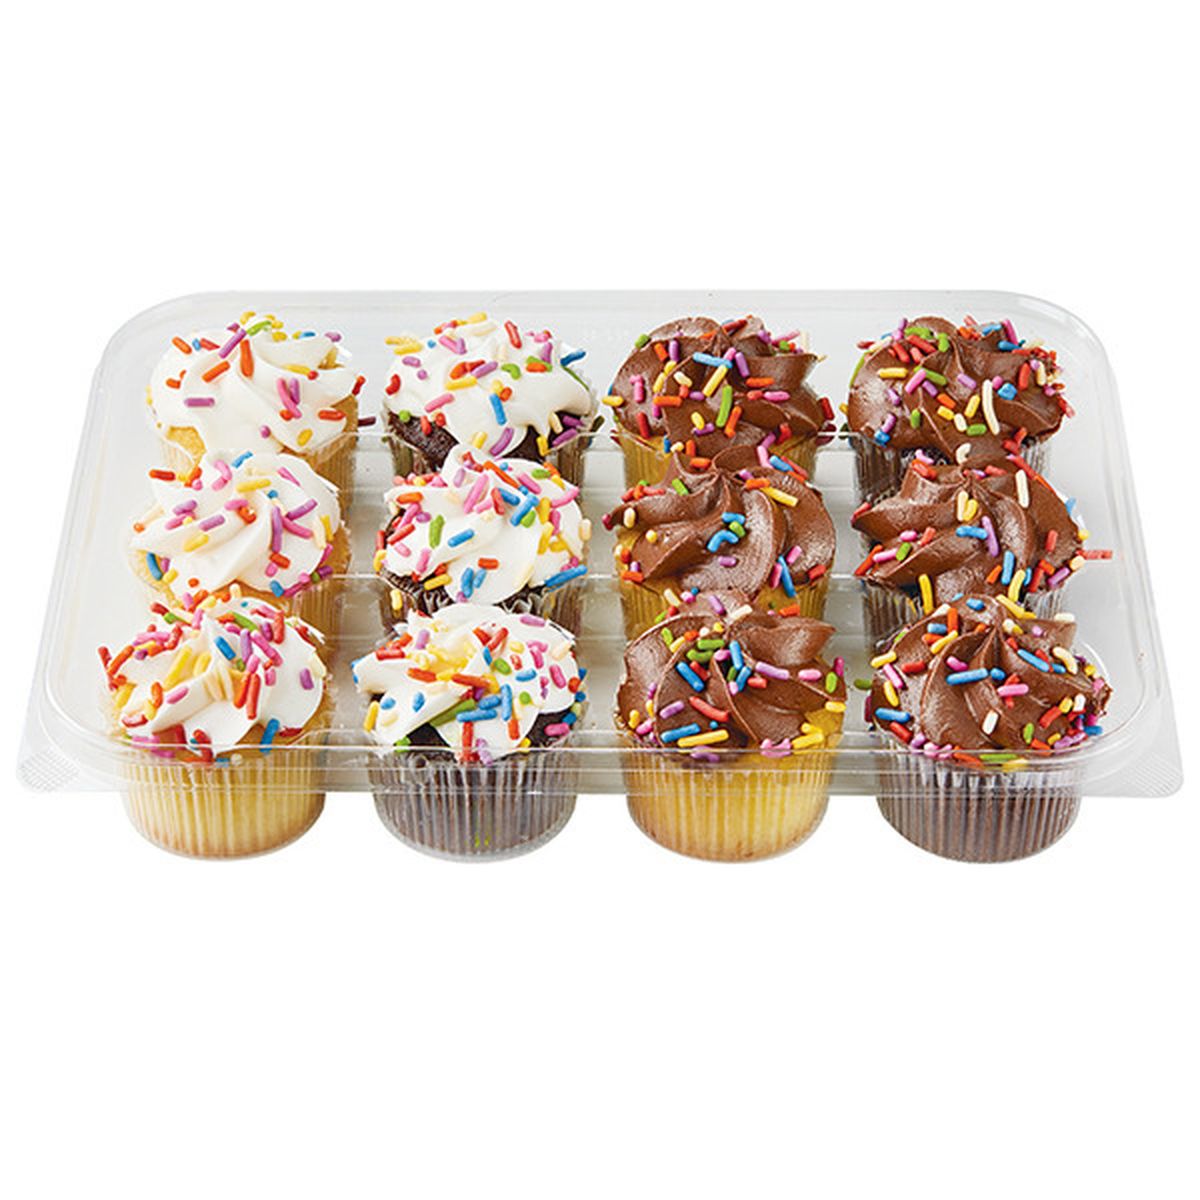 Calories in Wegmans Mini Iced Assorted Cupcakes, 12 Pack